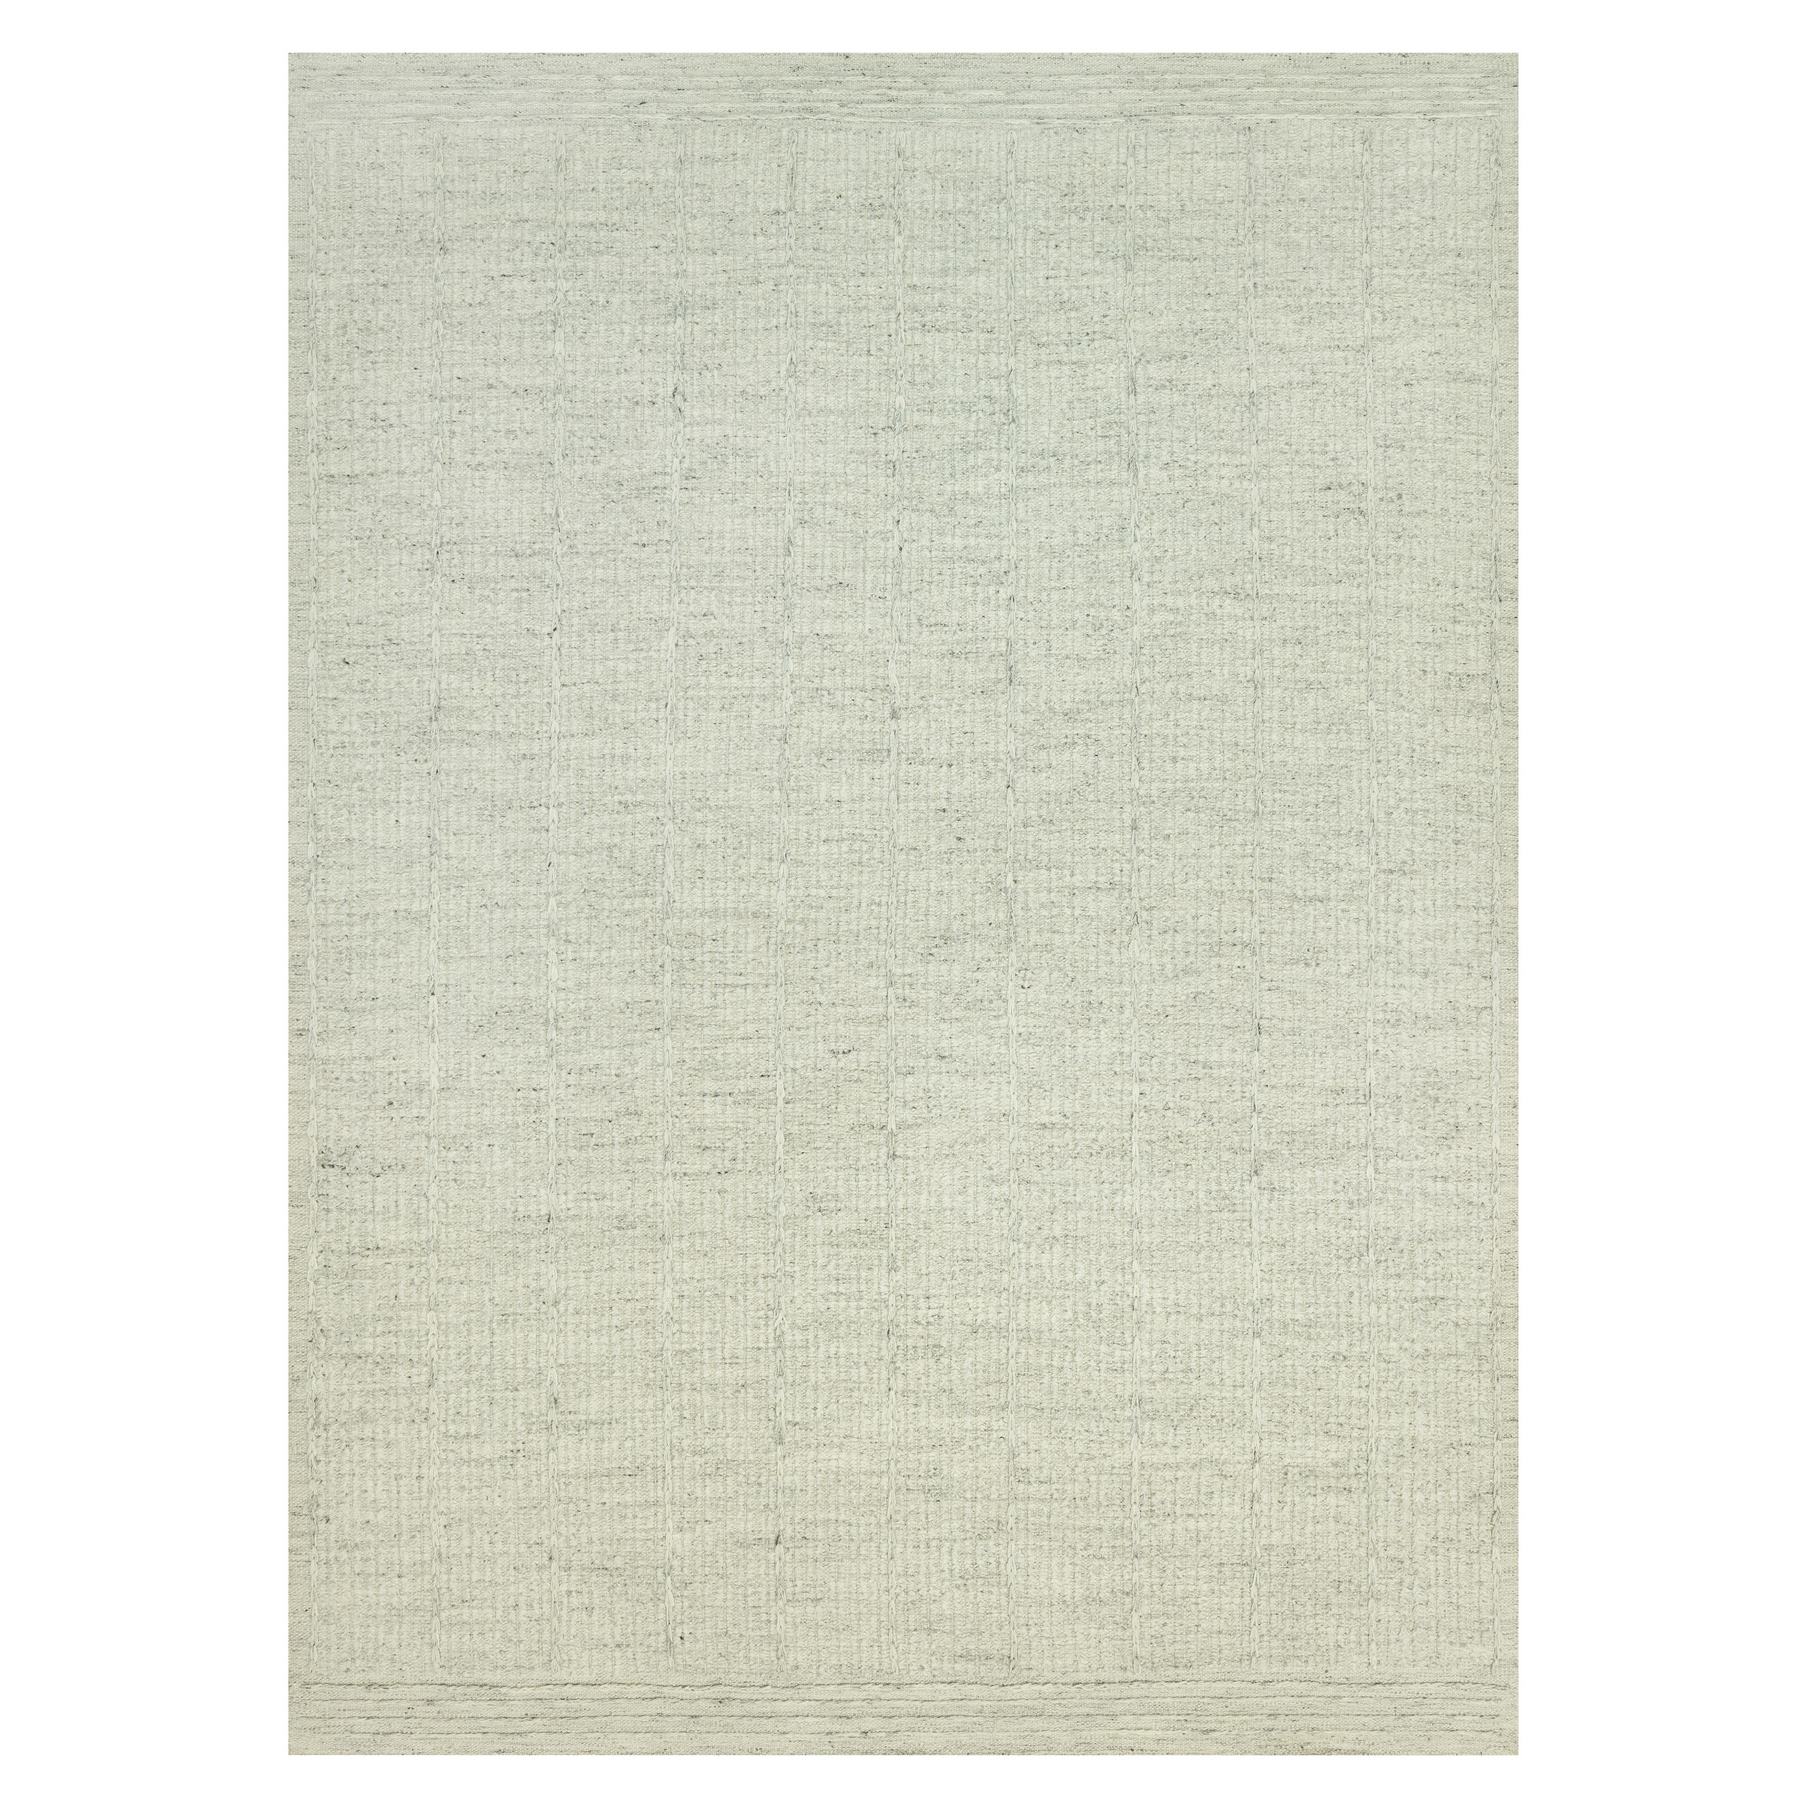 traditional Wool Hand-Woven Area Rug 10'1